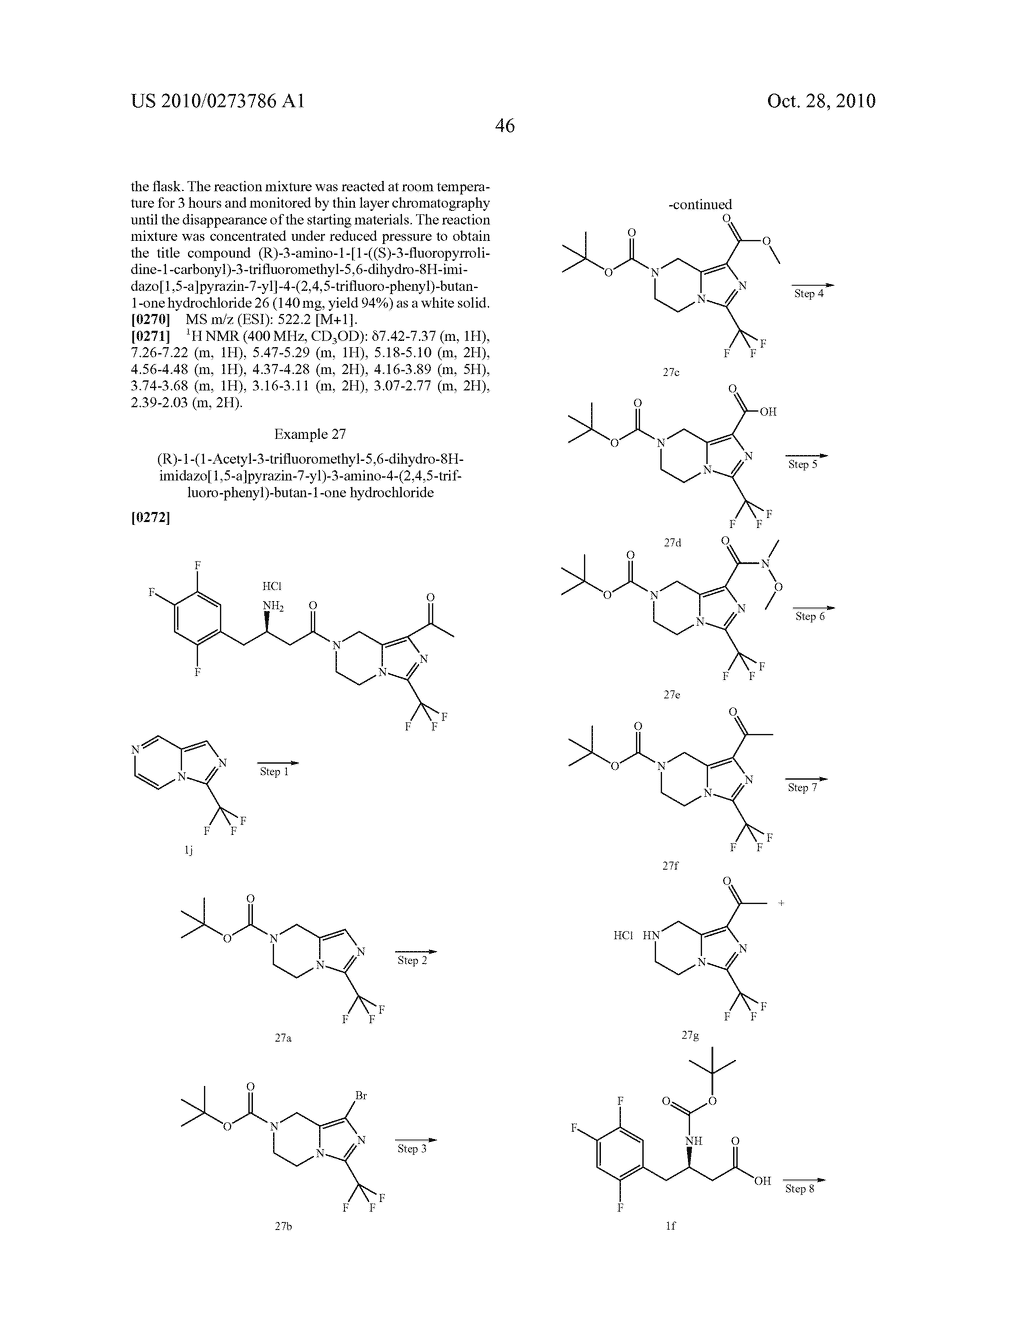 TETRAHYDRO-IMIDAZ0[1,5-A]PYRAZINE DERIVATIVES, PREPARATION PROCESS AND MEDICINAL USE THEREOF - diagram, schematic, and image 47